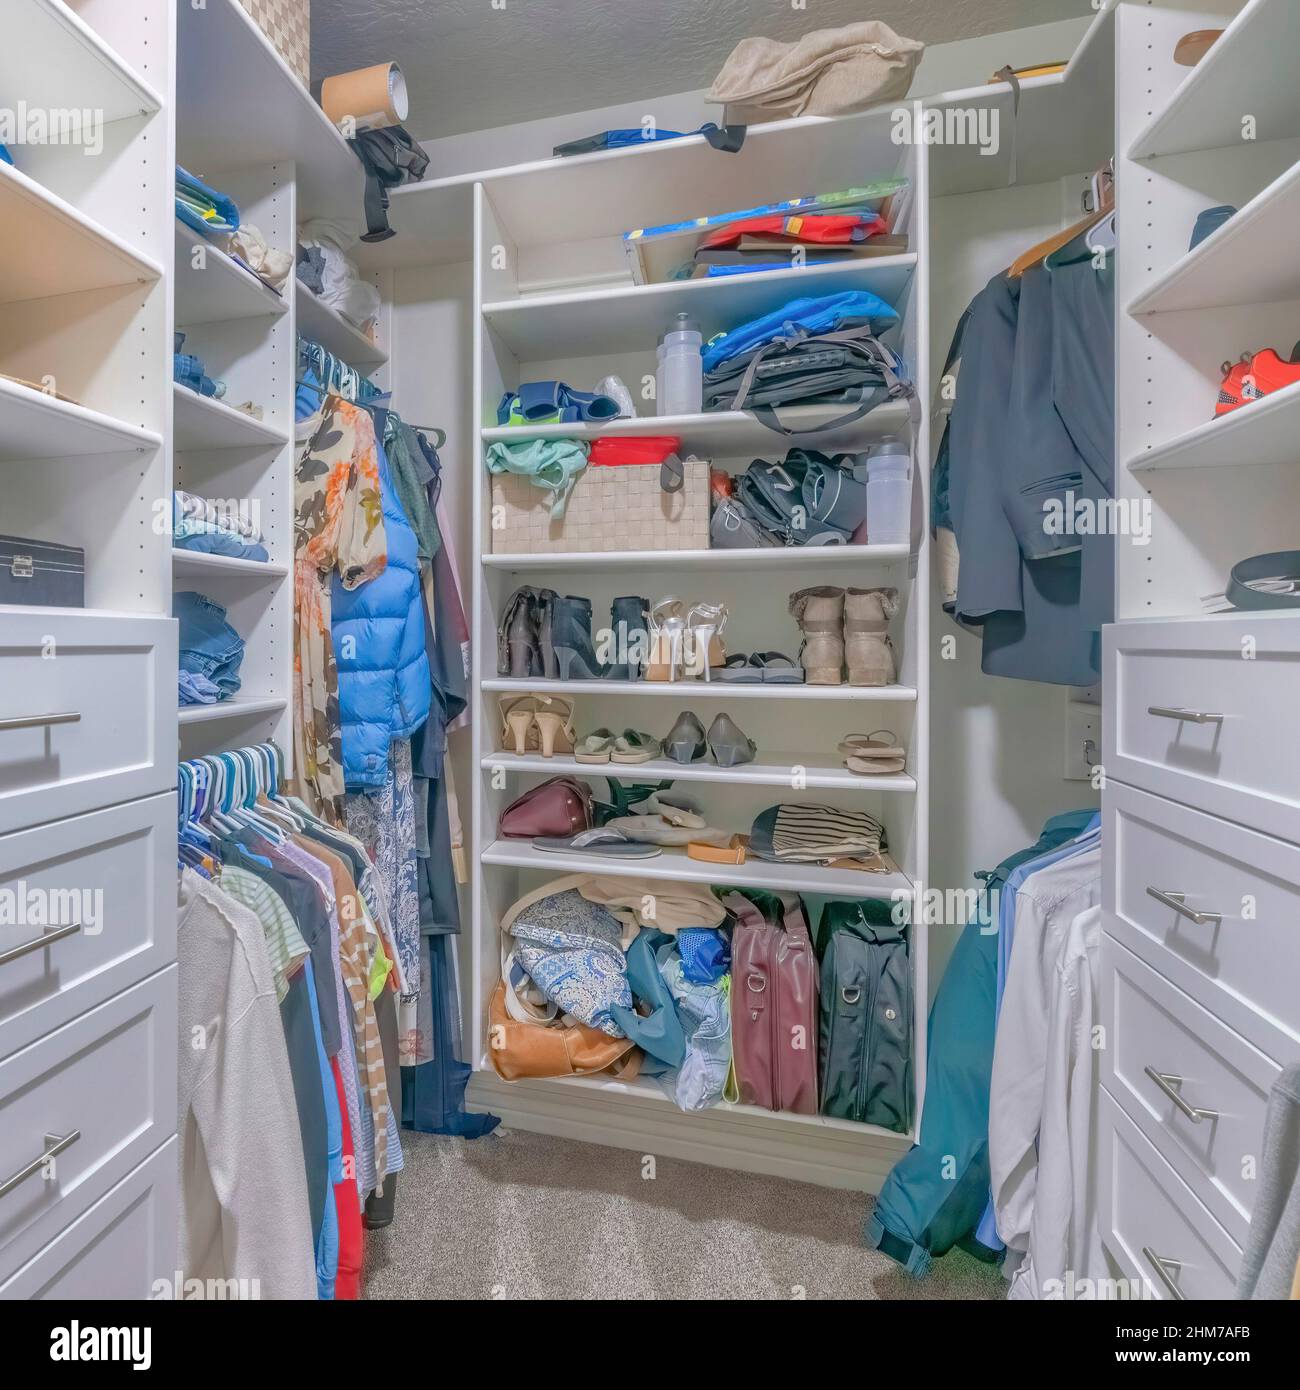 Square Walk in closet interior with white wooden shelving units Stock Photo  - Alamy